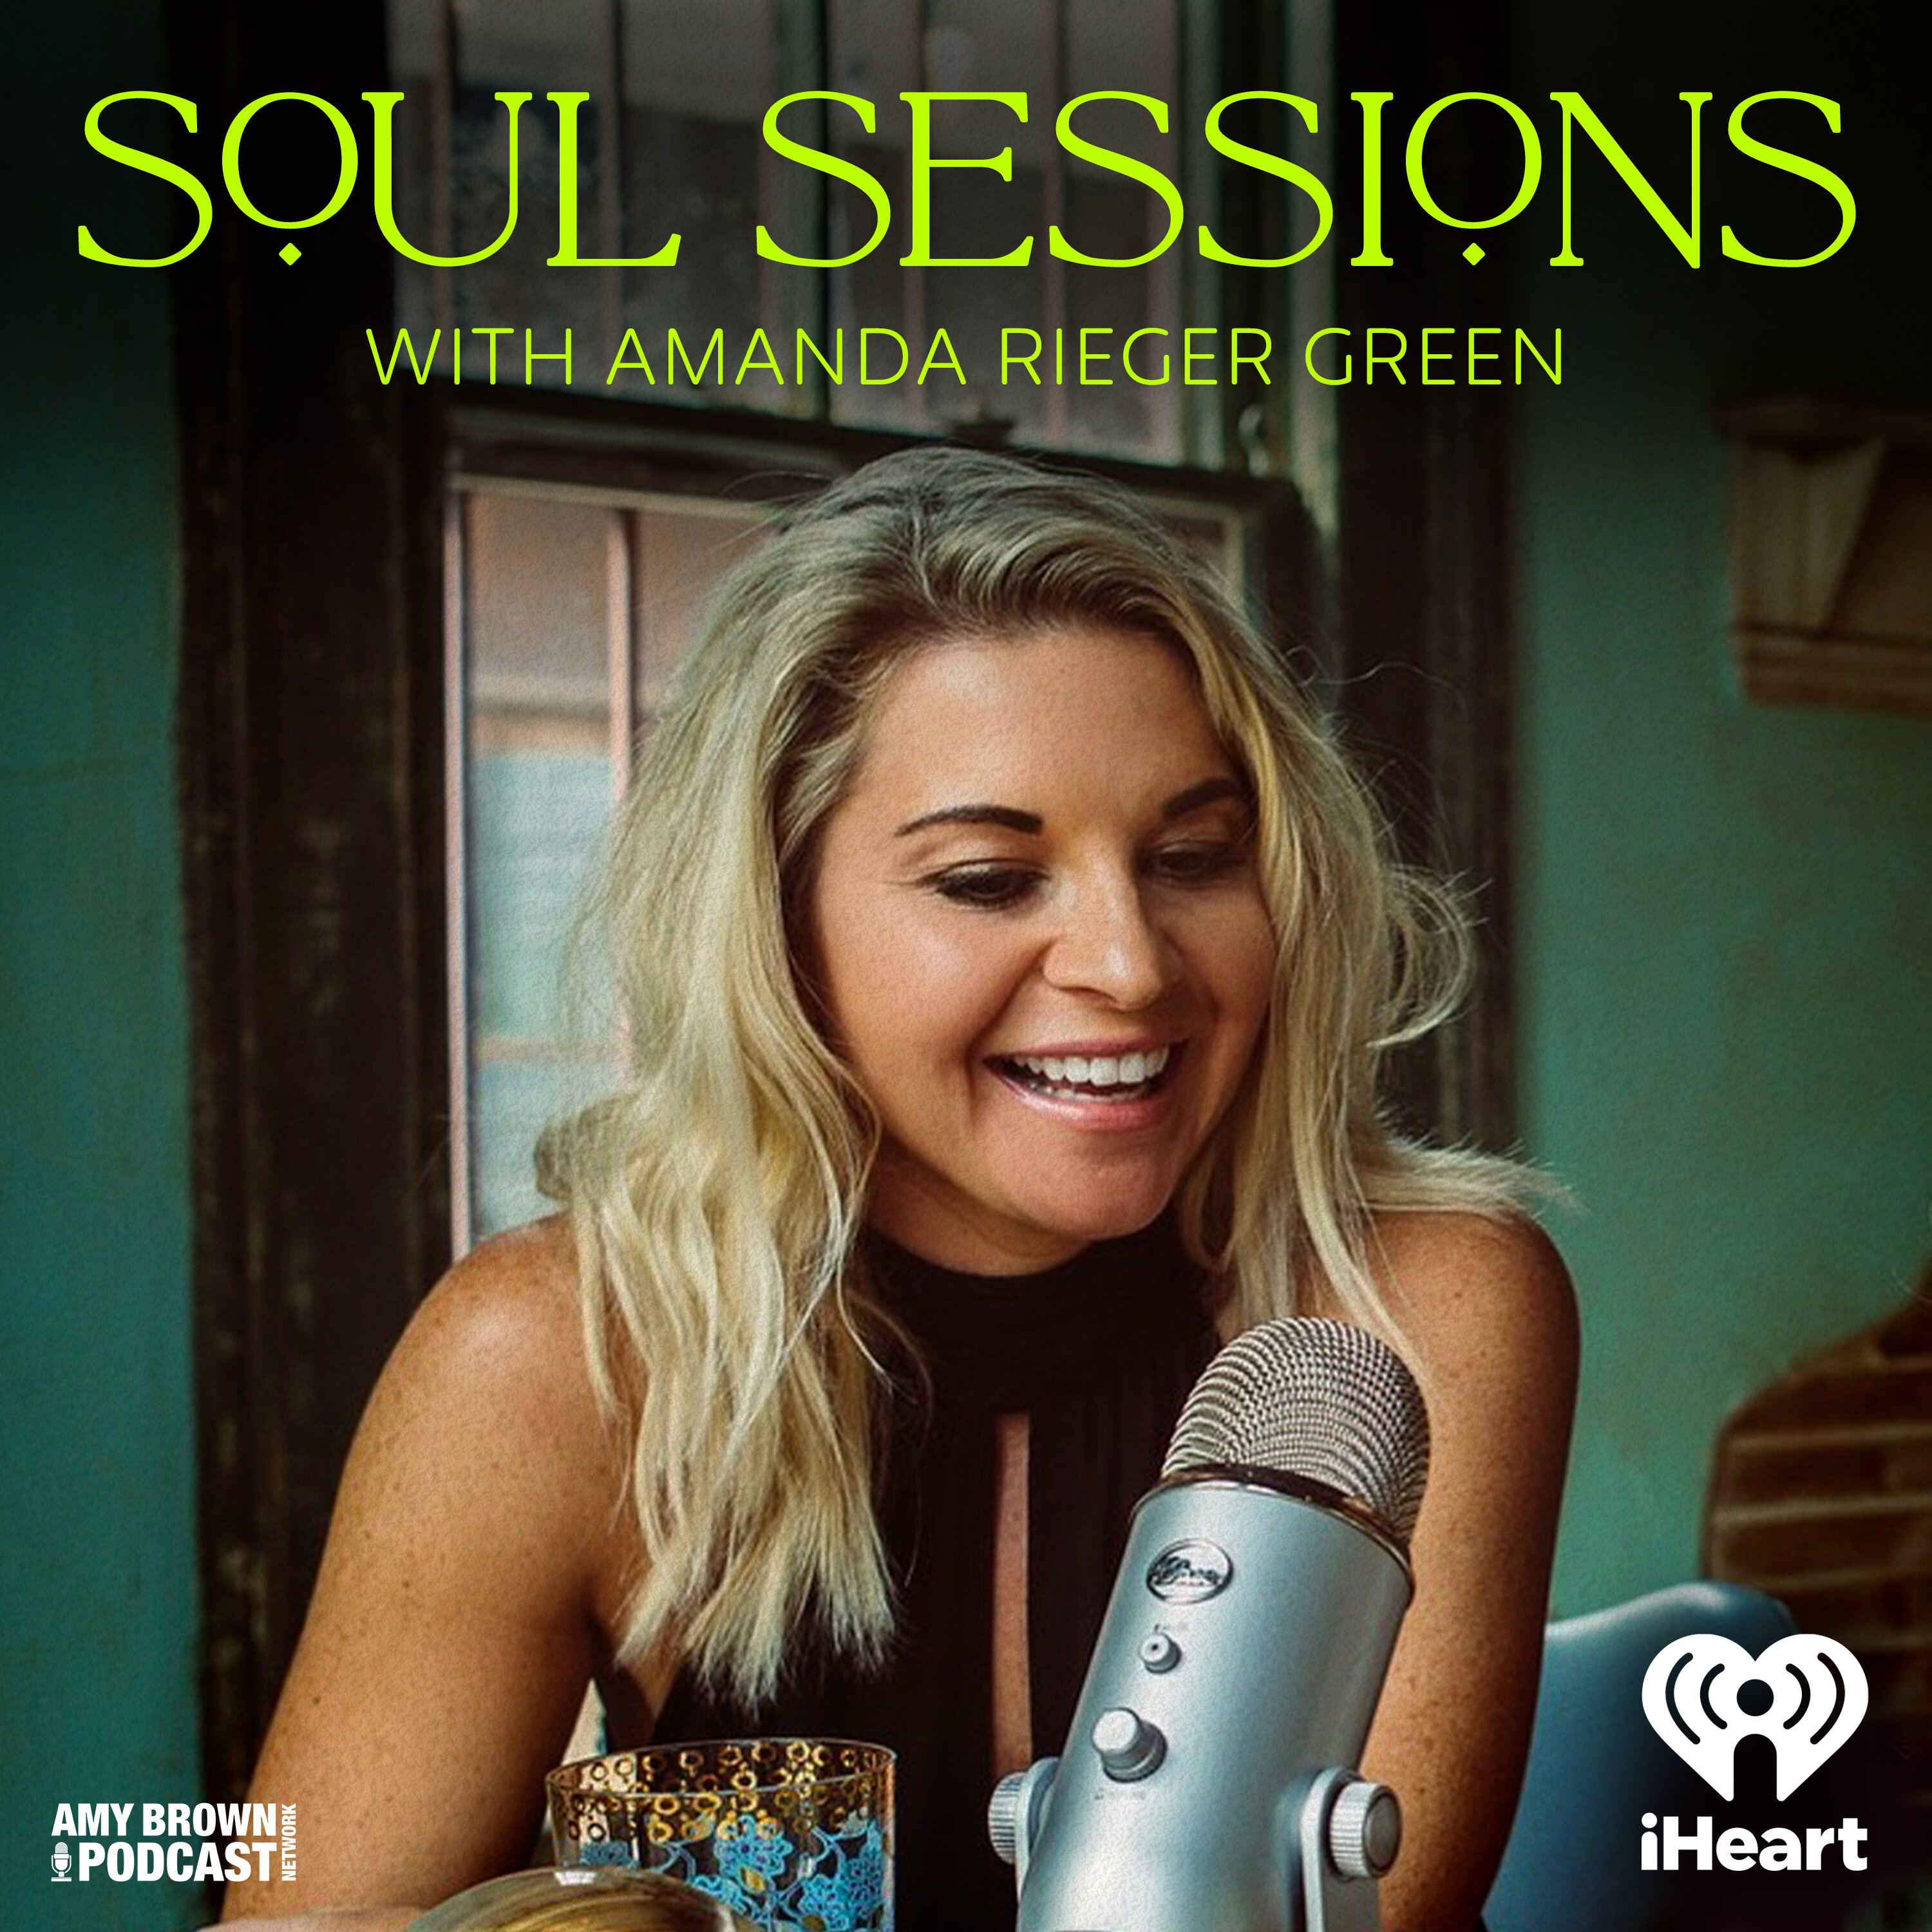 Introducing: Soul Sessions with Amanda Rieger Green